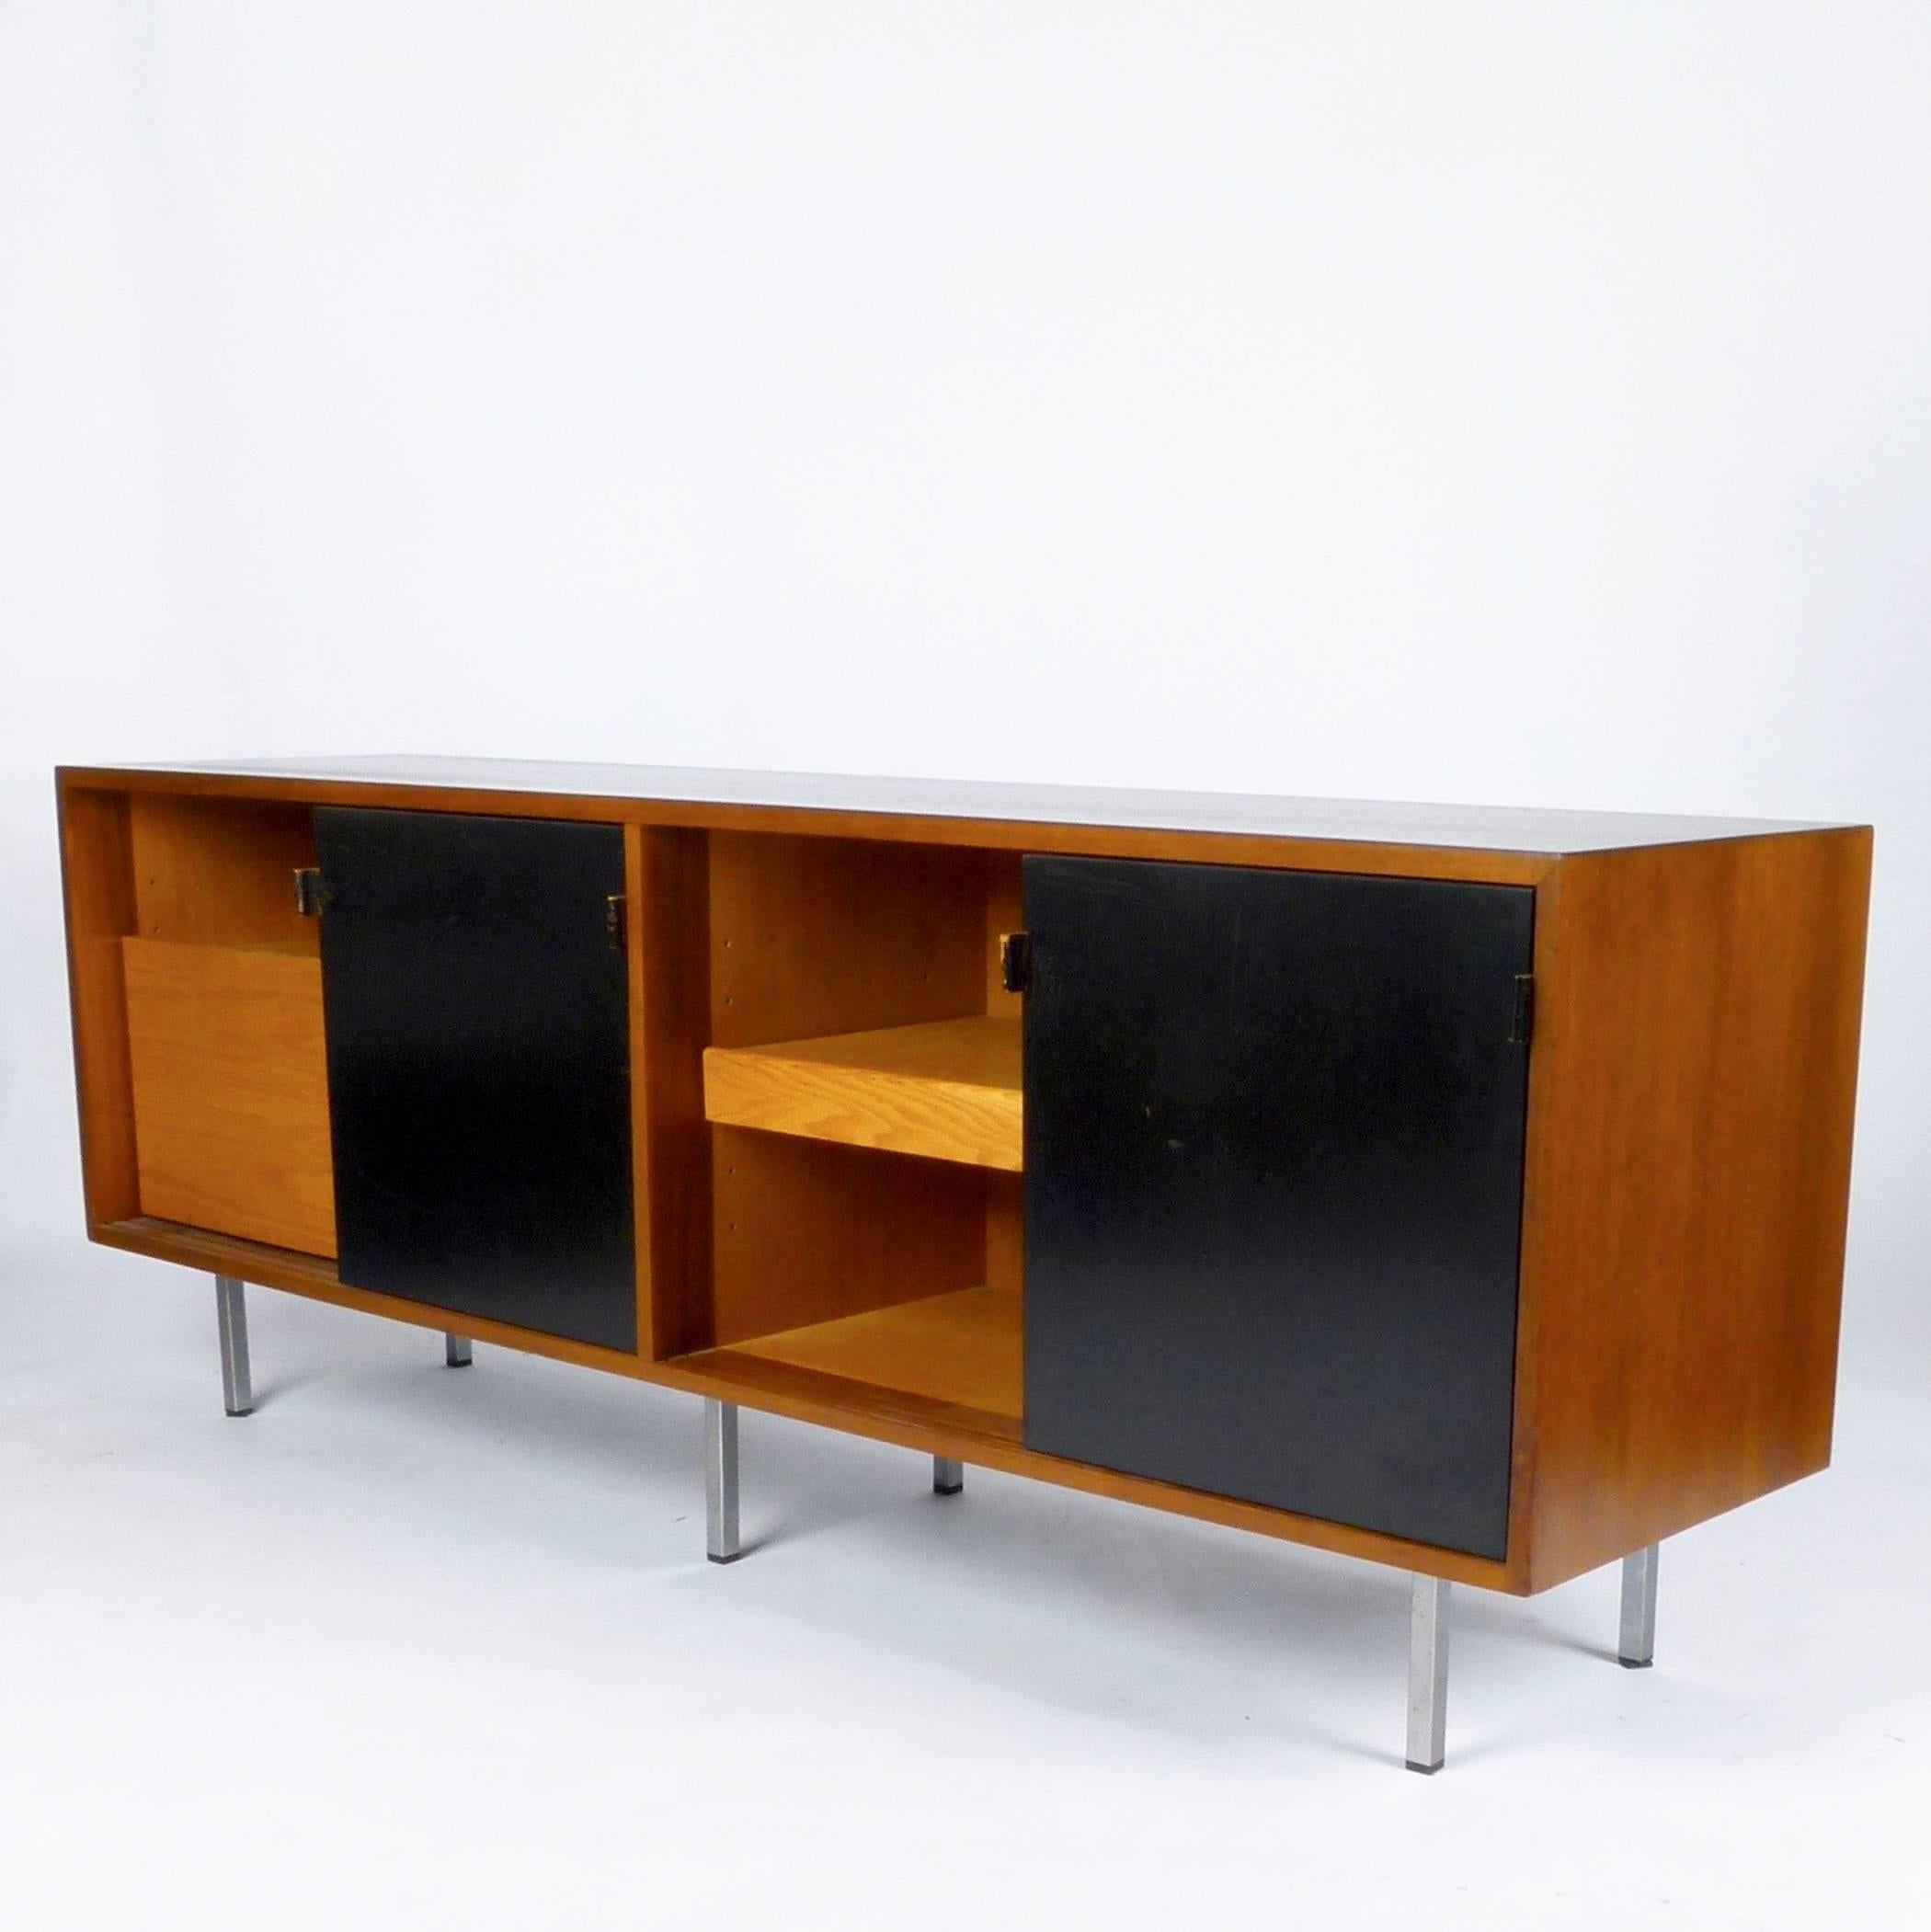 Walnut credenza with six black lacquered sliding doors, six steel legs, five drawers, three adjustable shelves, one pull-out shelf and leather door pulls by Florence Knoll, circa 1960. Retains Knoll label.